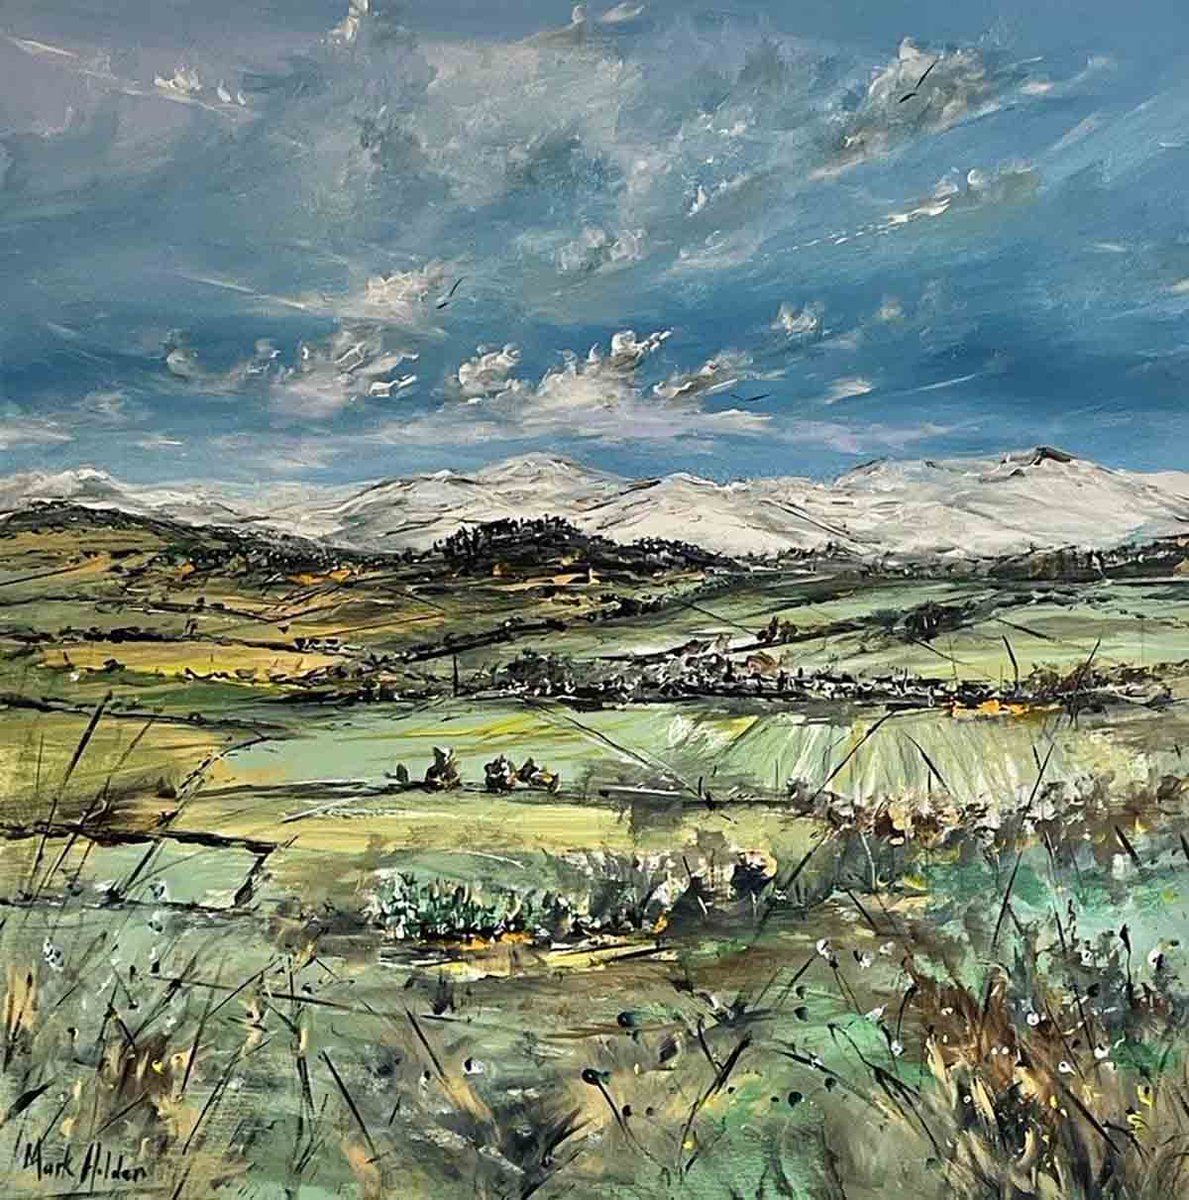 A new show at @sprosongallery in St Andrews highlights the painterly talents of Mark Holden, whose style captures the essence of the town and landscape.
artmag.co.uk/the-essential-…
#artmag #scottishart #scottishgalleries #scottishartonline #scottishpainting #scottishprinting